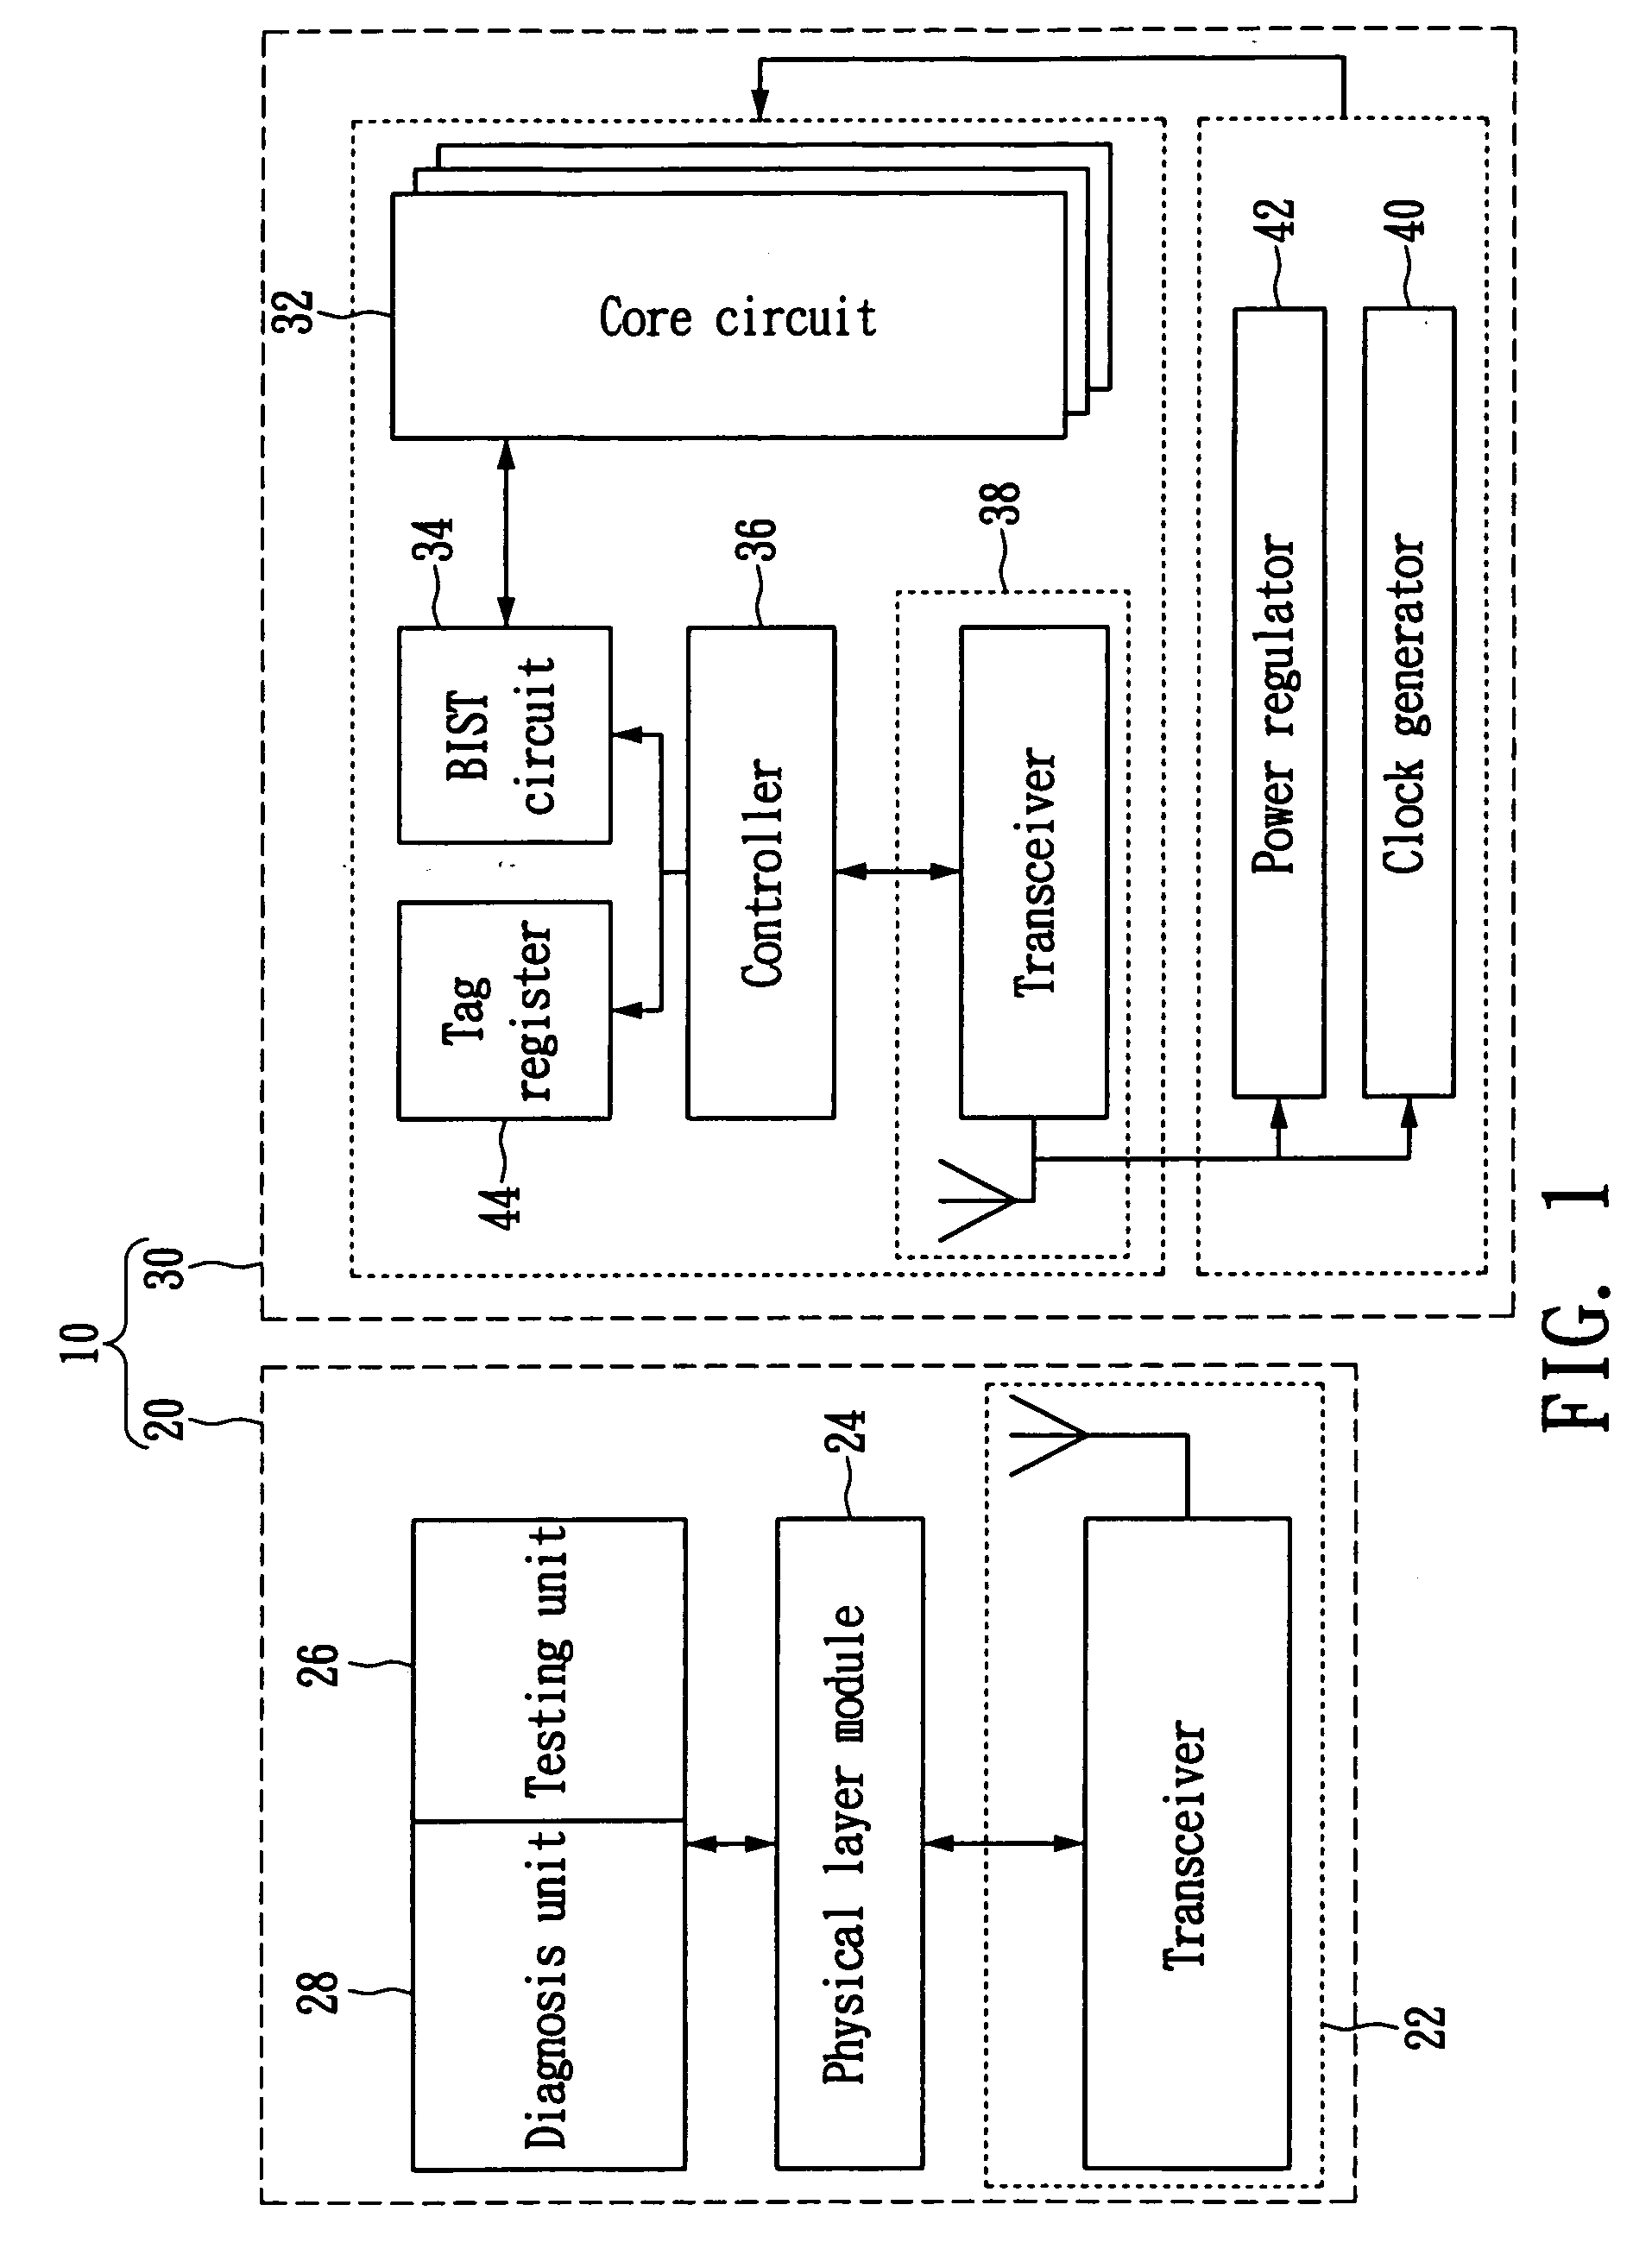 Probing system for integrated circuit devices